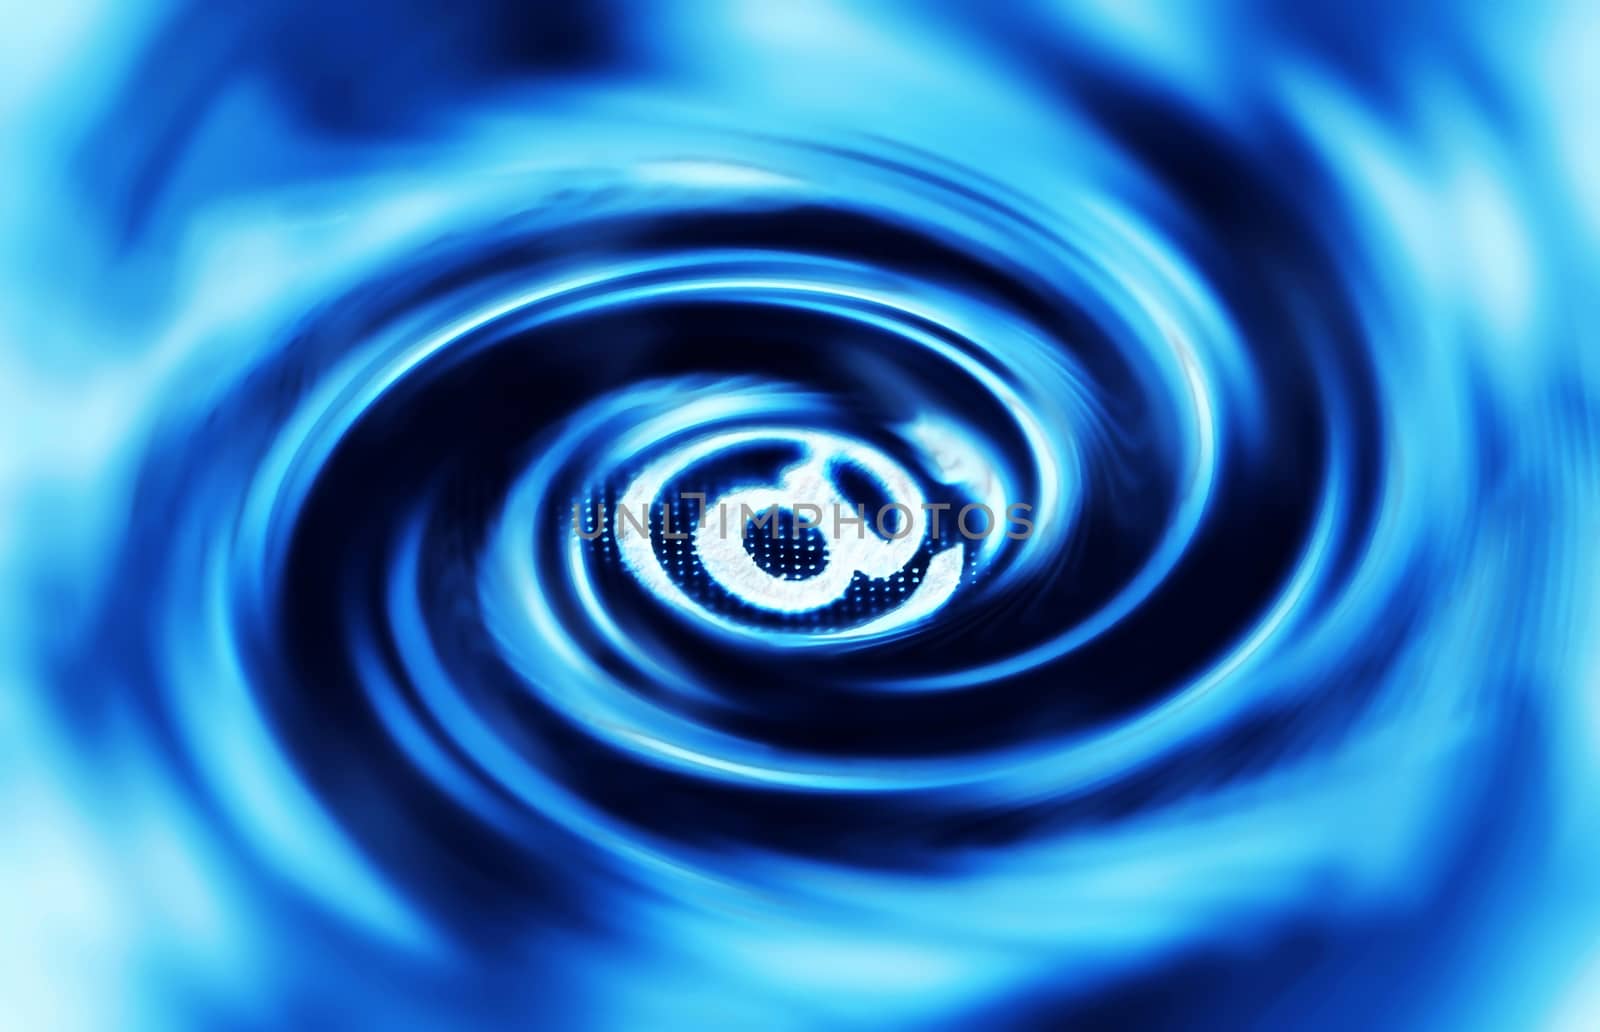 Email symbol on a blue swirl background.
Like a black hole makes gravity waves.